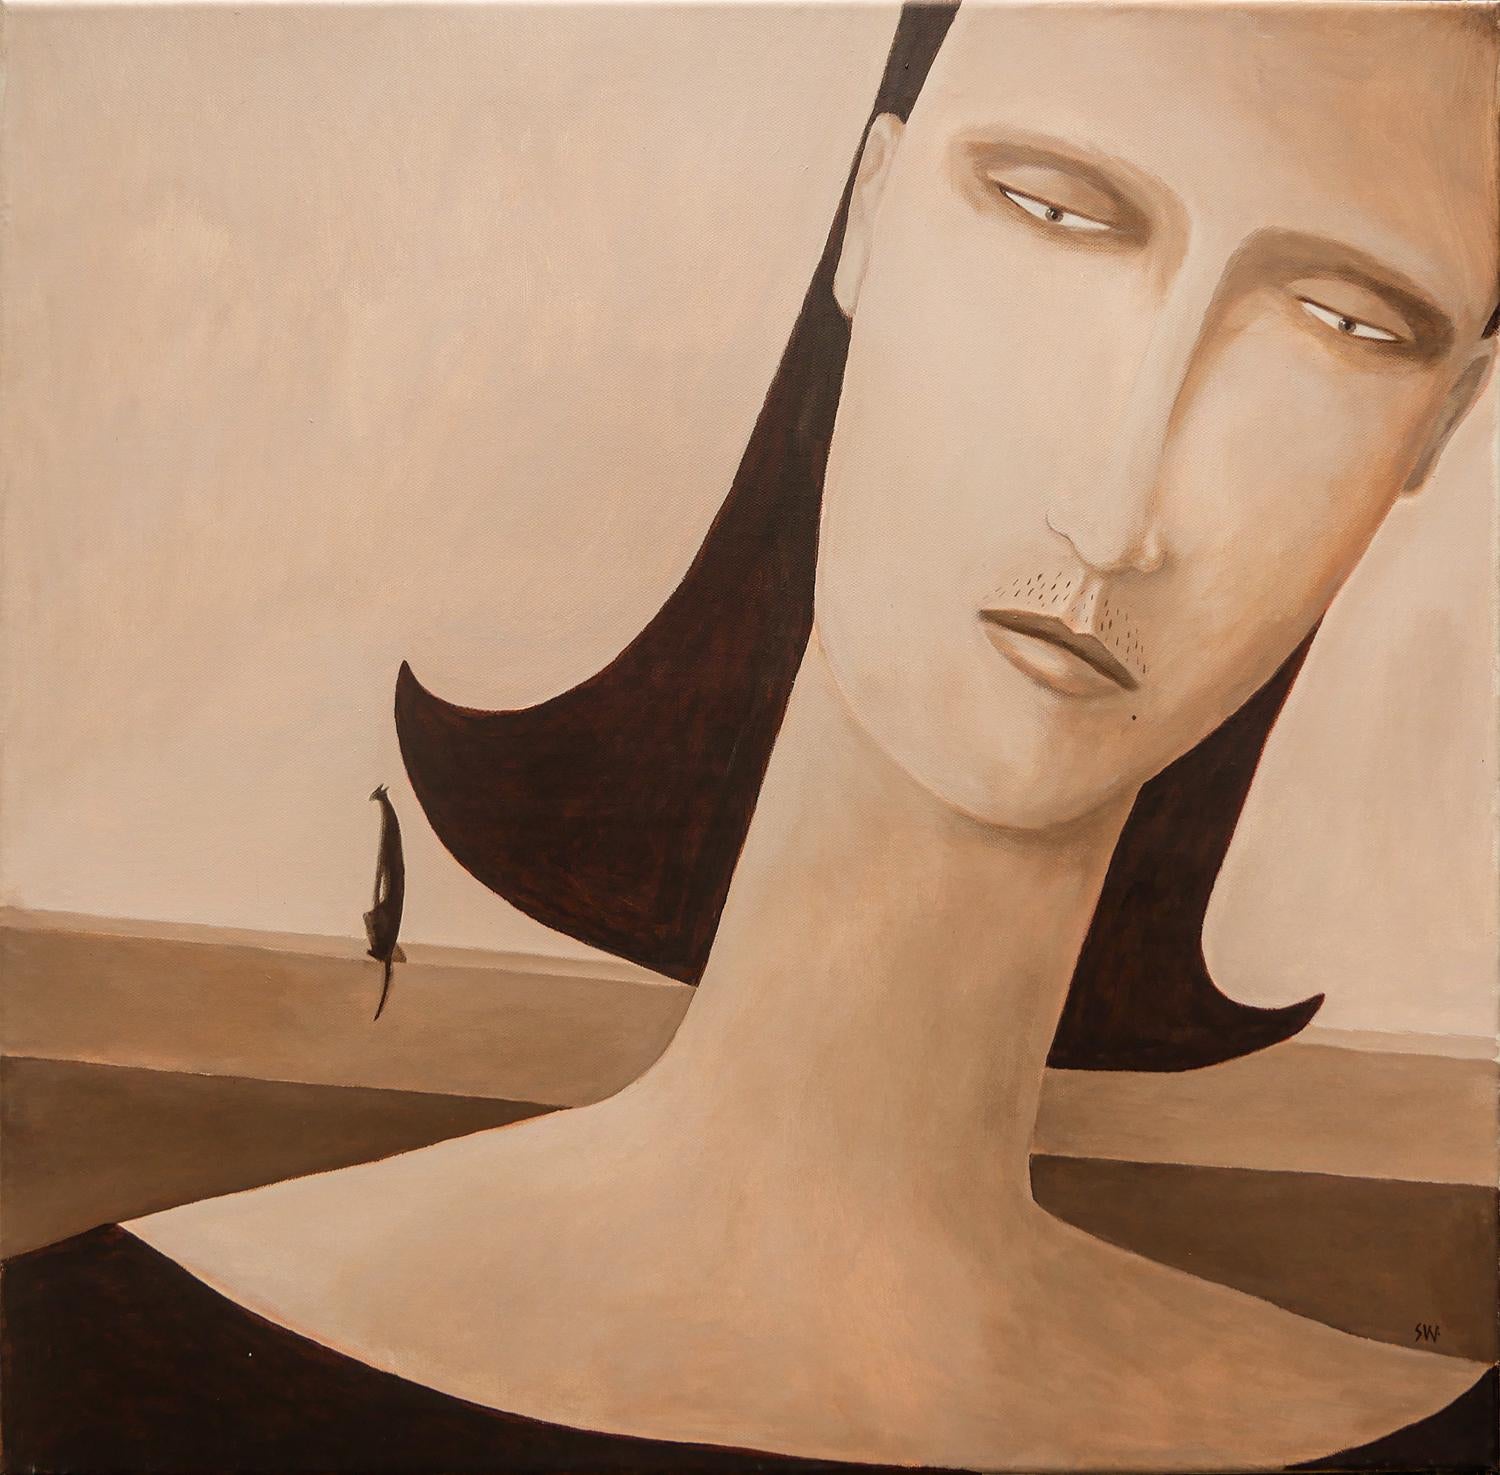 Brown / sepia-toned abstract figurative surrealistic painting by Houston, TX artist Scott Woodard. The painting depicts a figure with shoulder-length hair against a serene minimalist background with a cat. Signed by the artist at the bottom right.